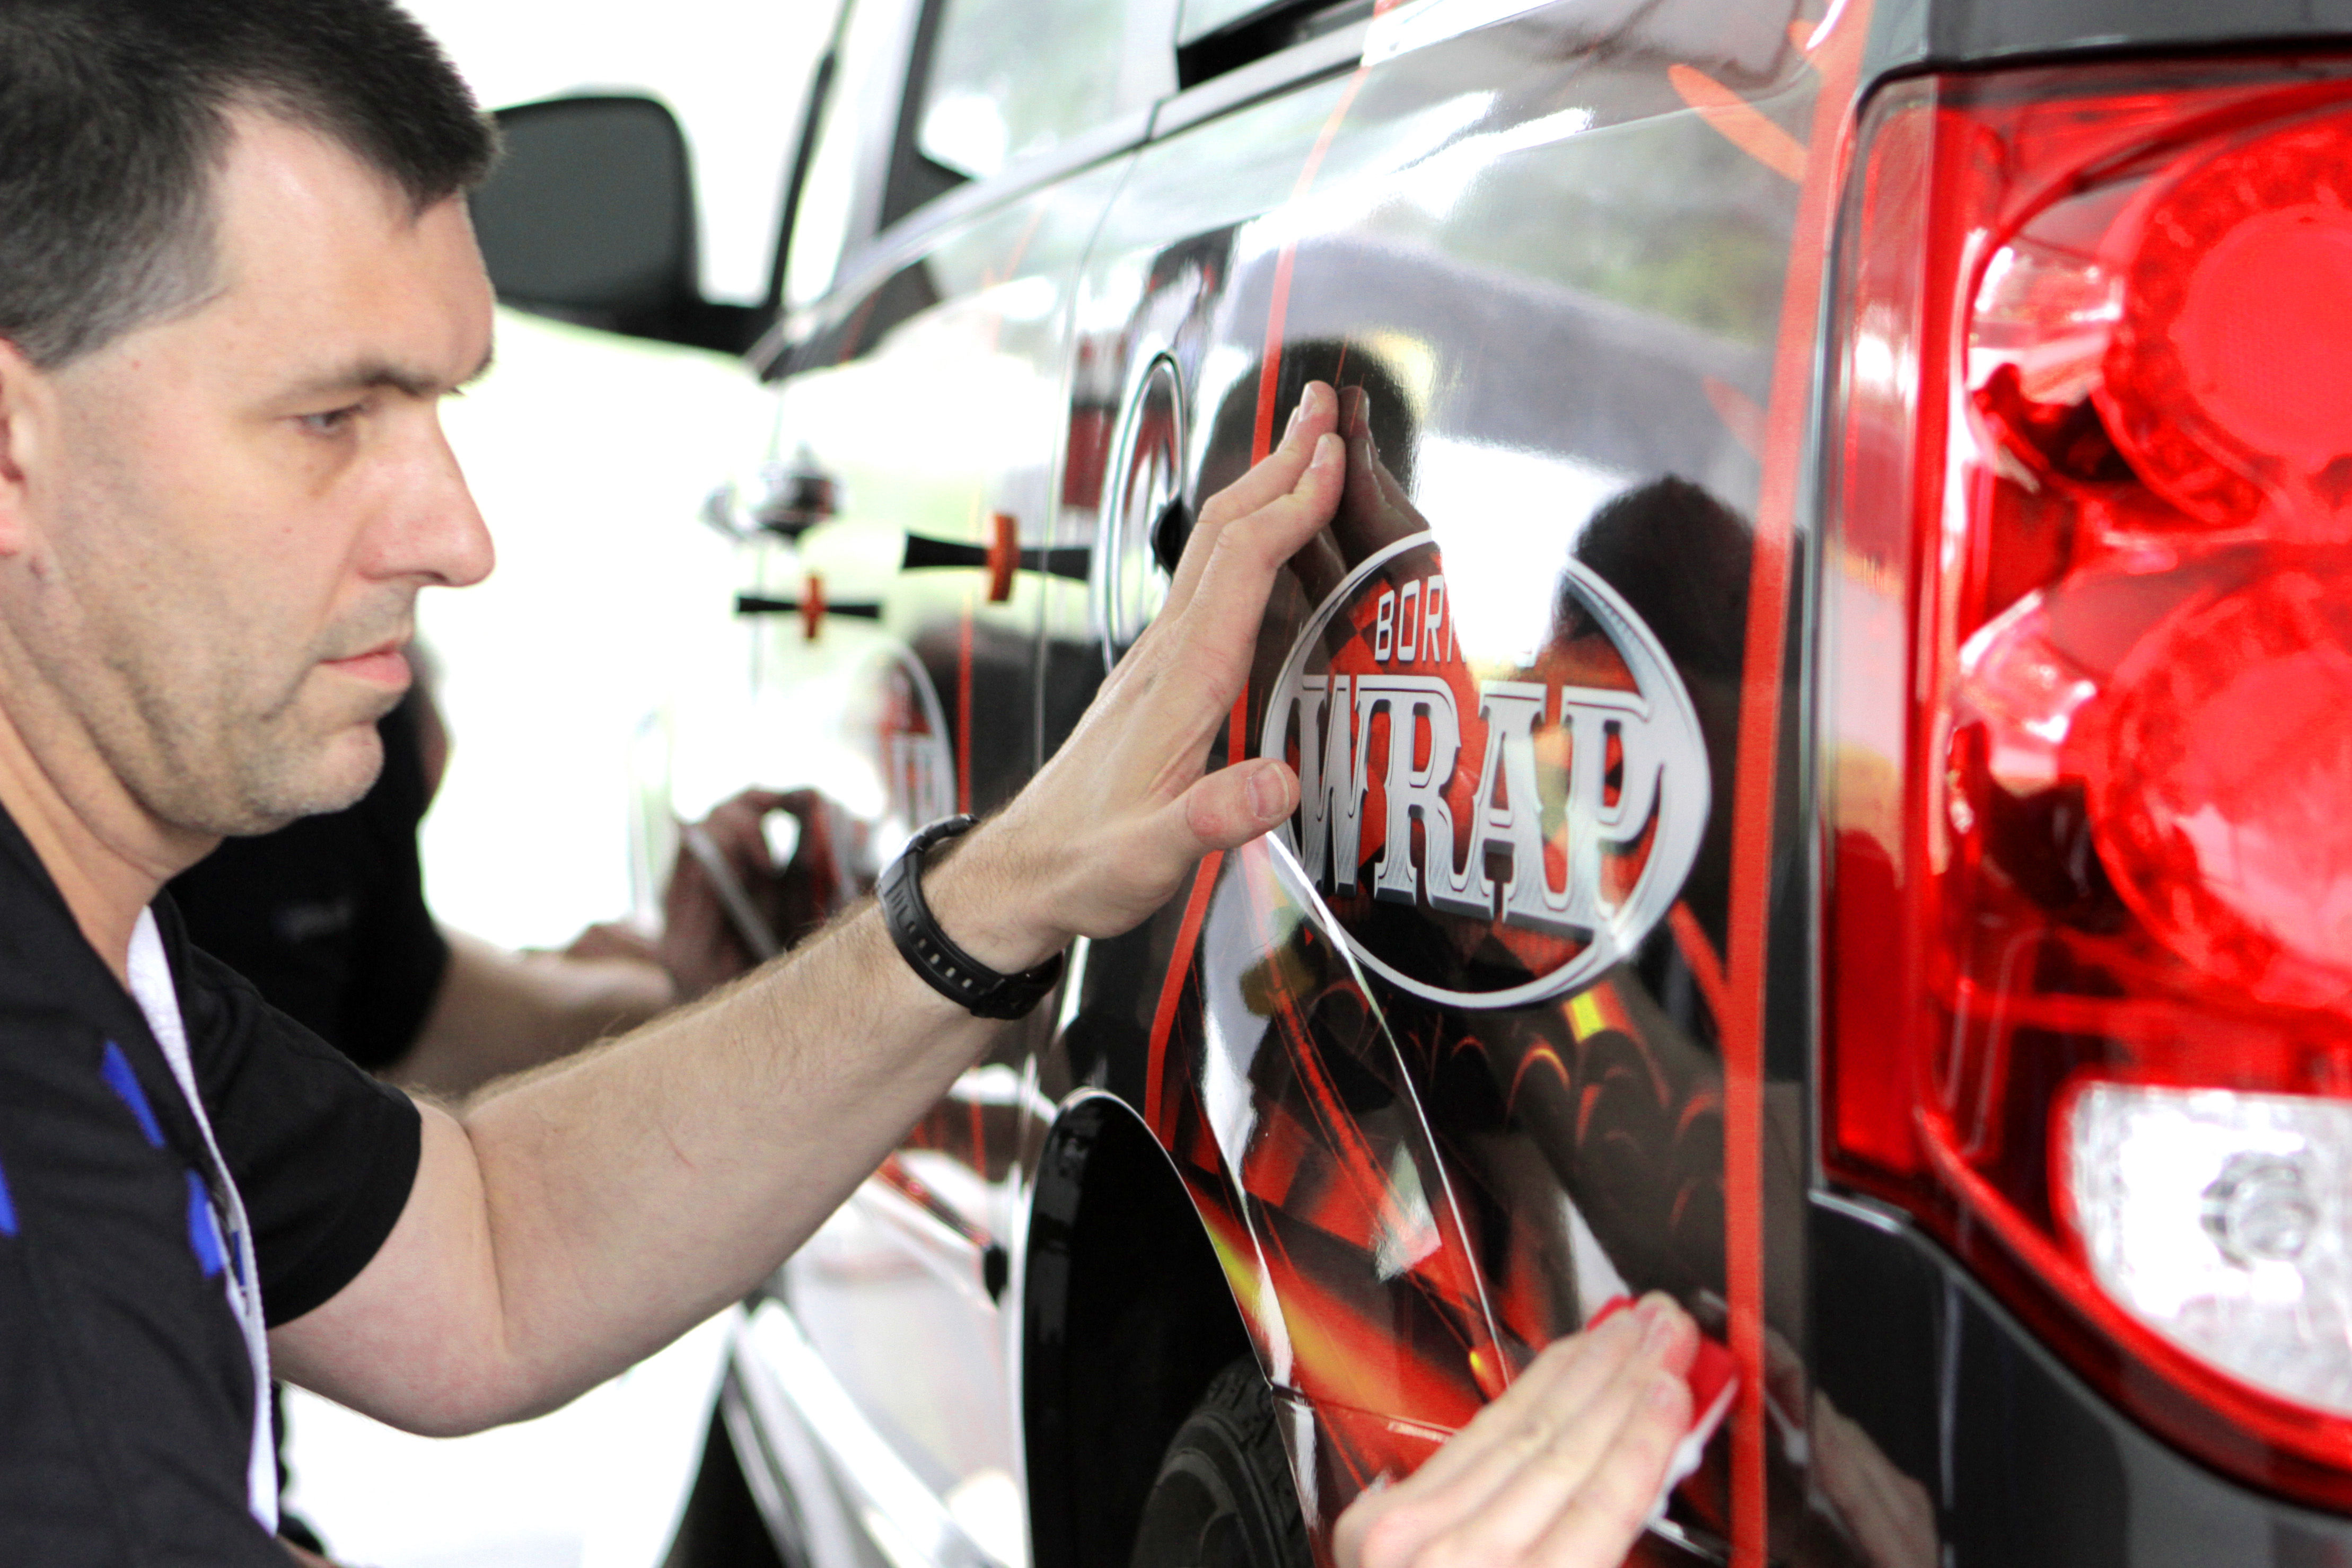 Roland announces its expanded 2019 Born-to-Wrap schedule of vehicle wrap workshops.